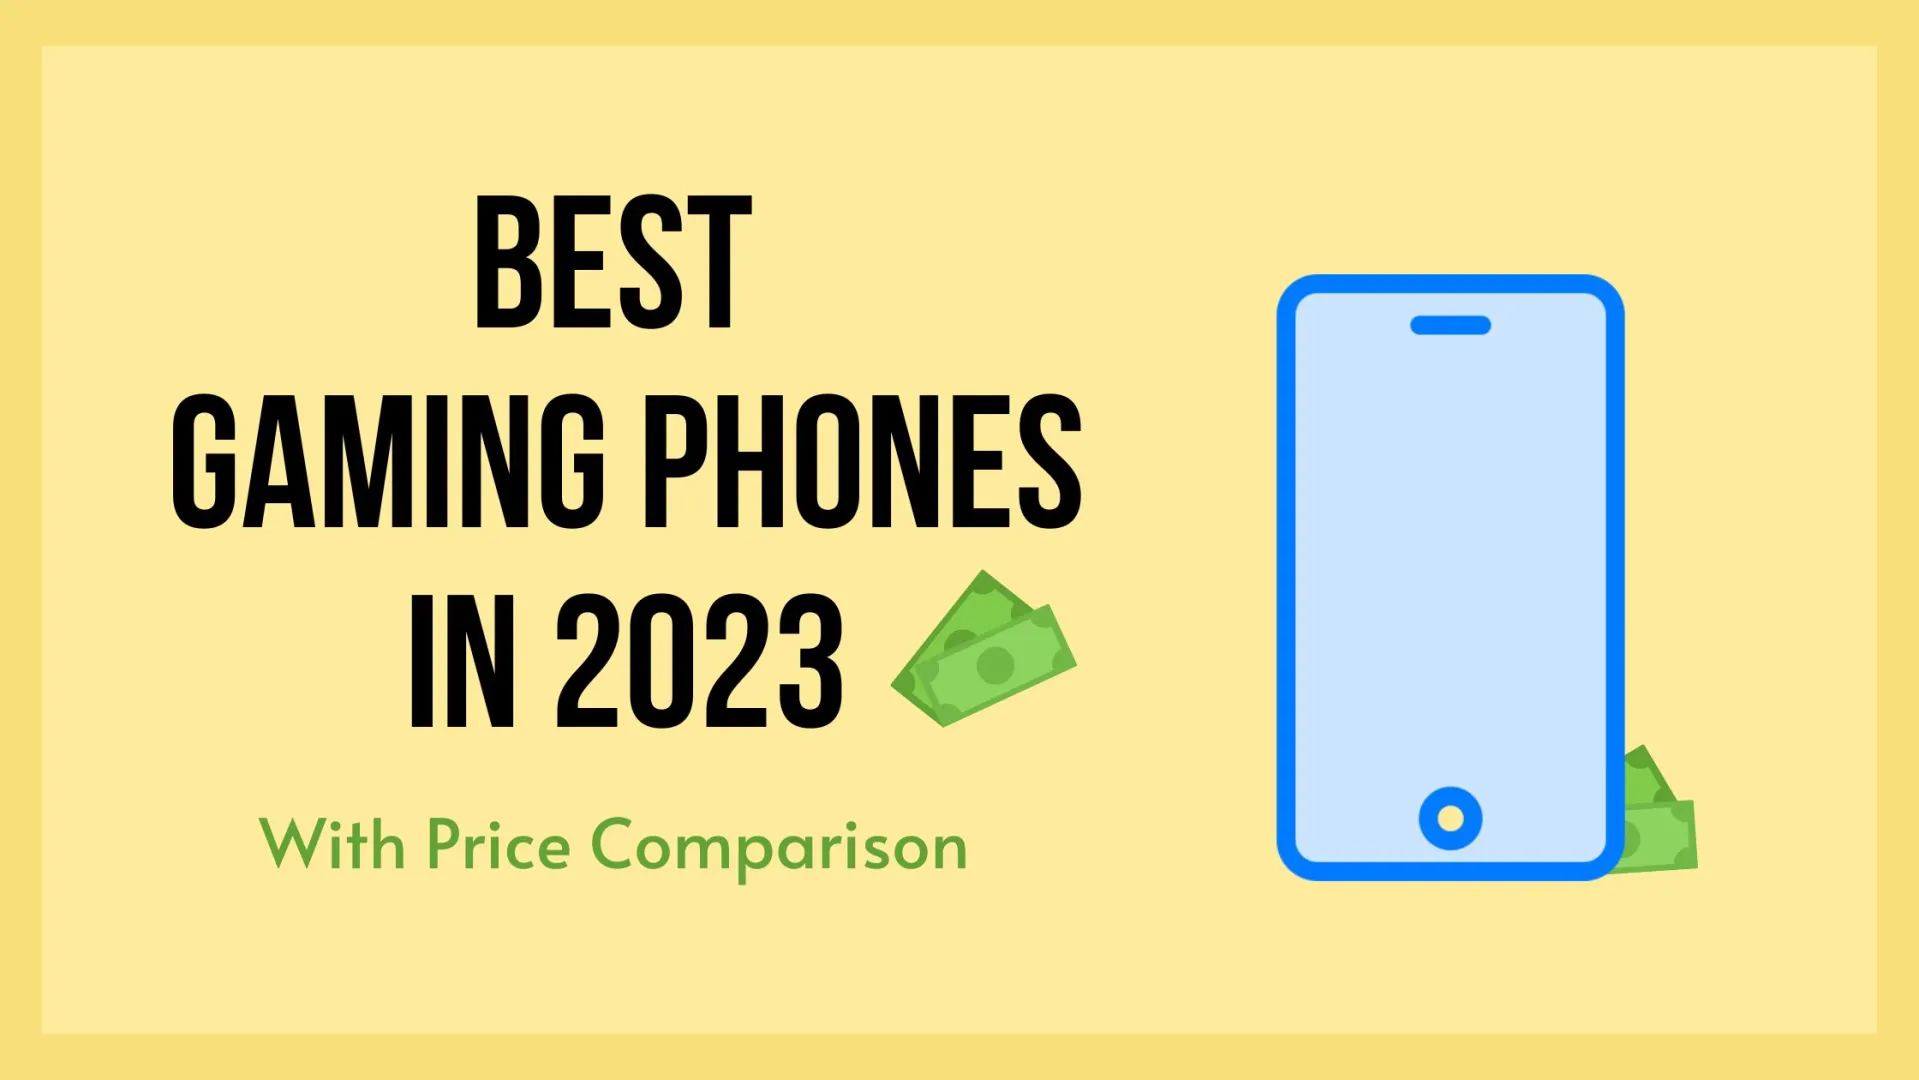 Best Gaming Phones In 2023 With Price Comparison